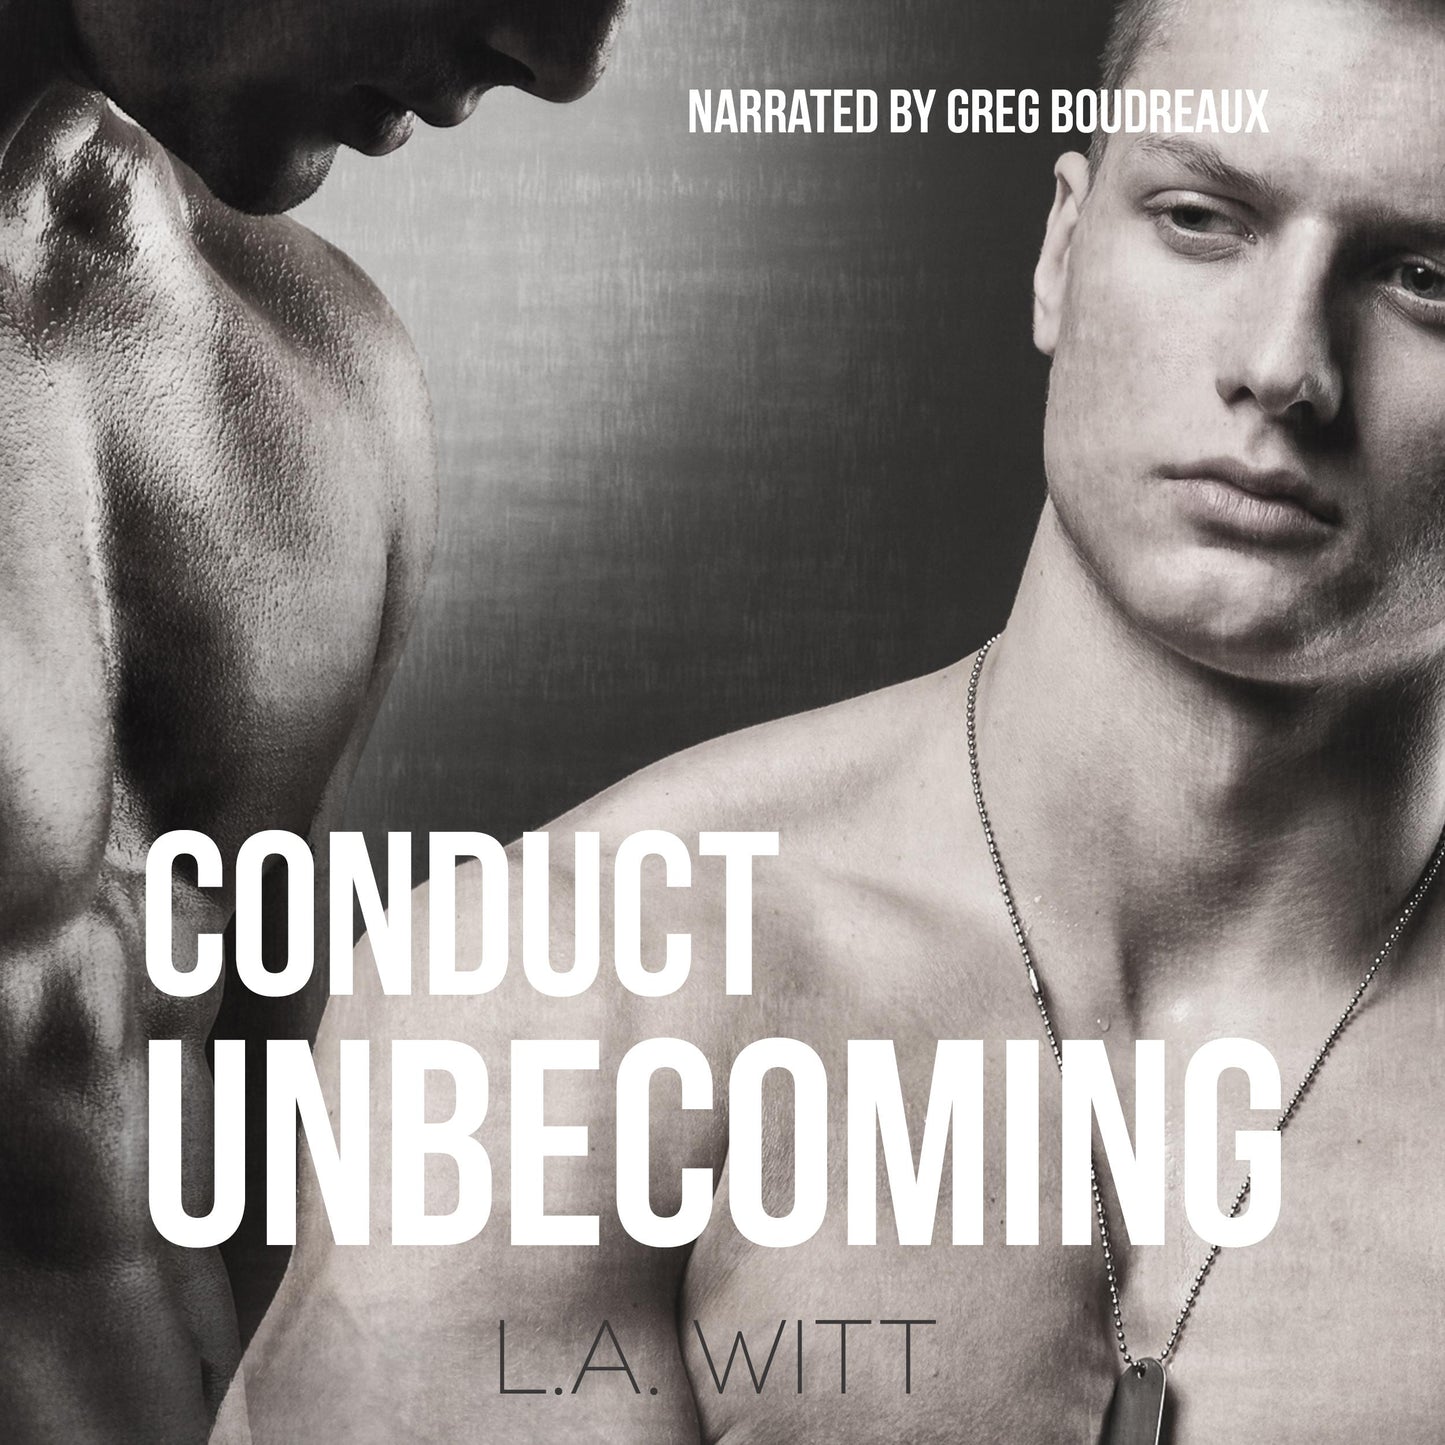 AUDIOBOOK: Conduct Unbecoming